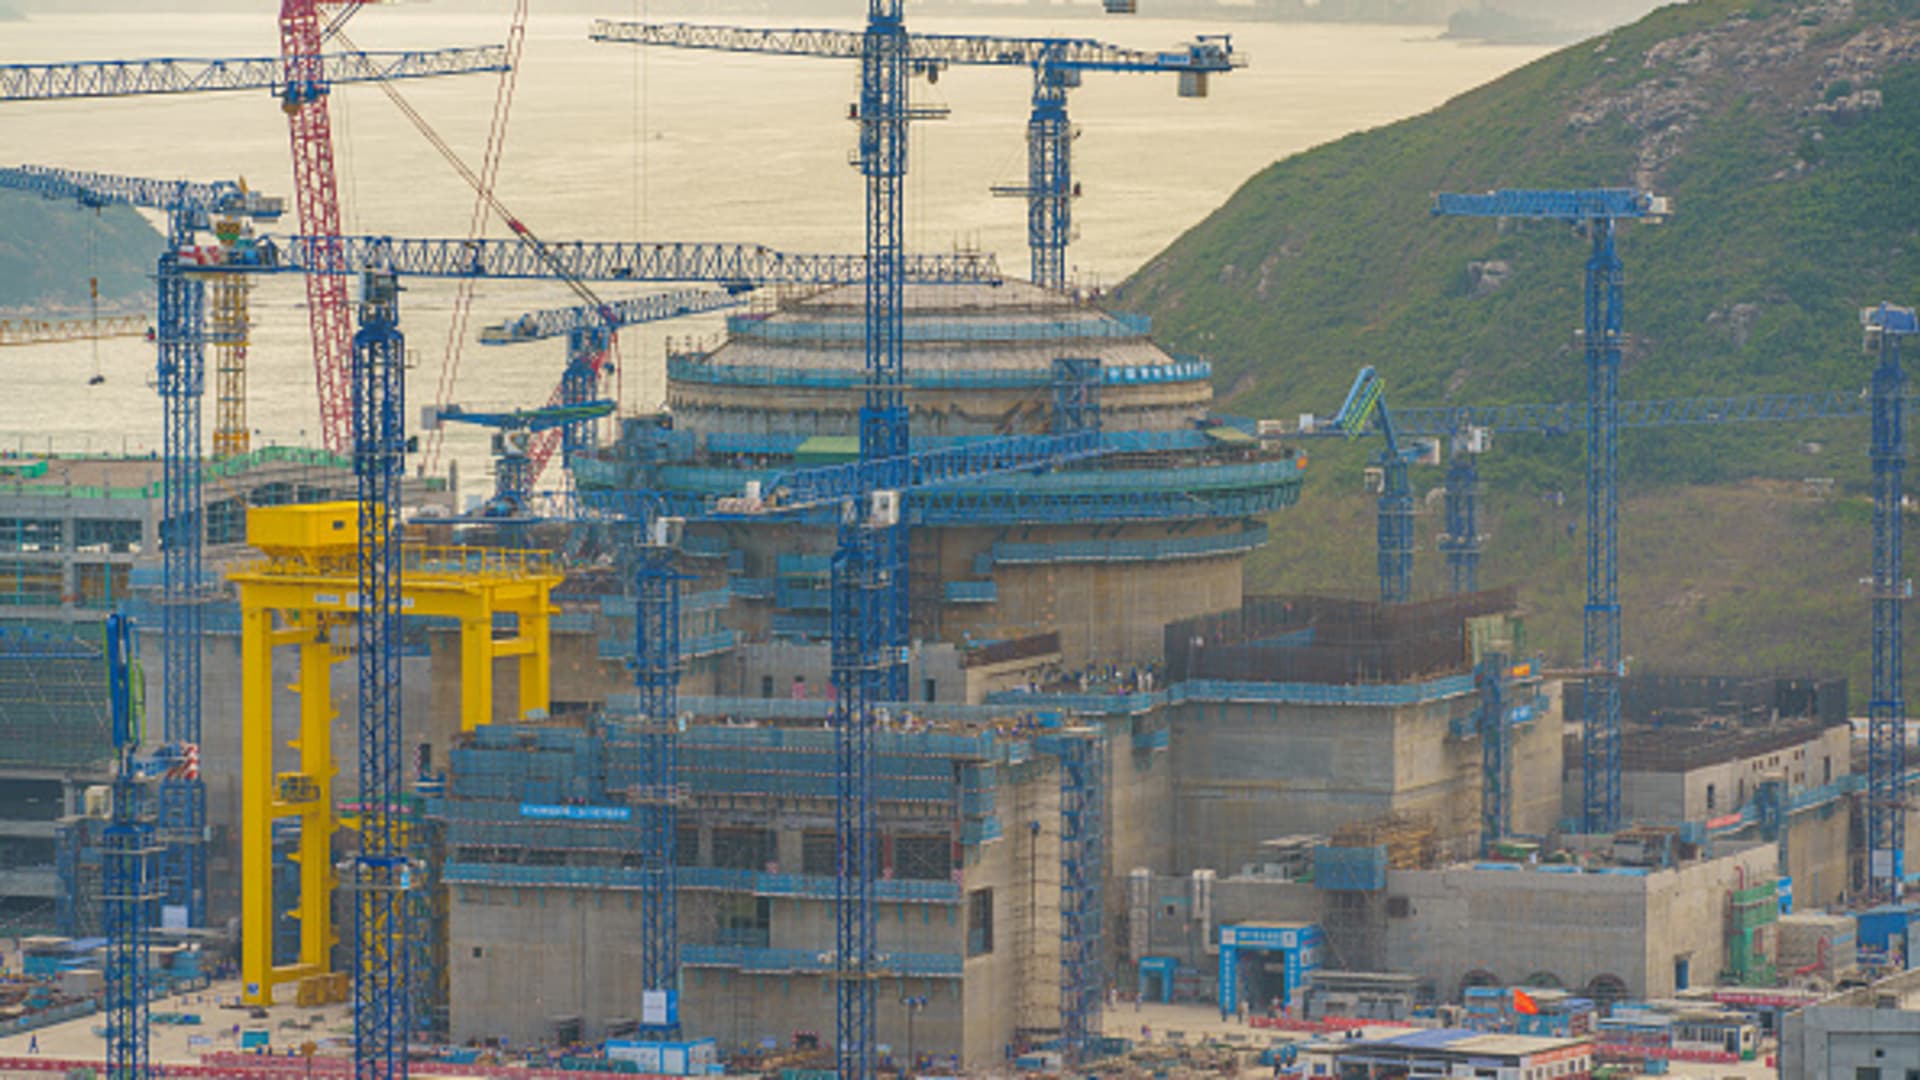 HUIZHOU, CHINA - FEBRUARY 19: Taipingling Nuclear Power Plant is pictured on February 19, 2023 in Huizhou, Guangdong Province of China. Taipingling Nuclear Power Plant is scheduled to be put into operation in 2025.